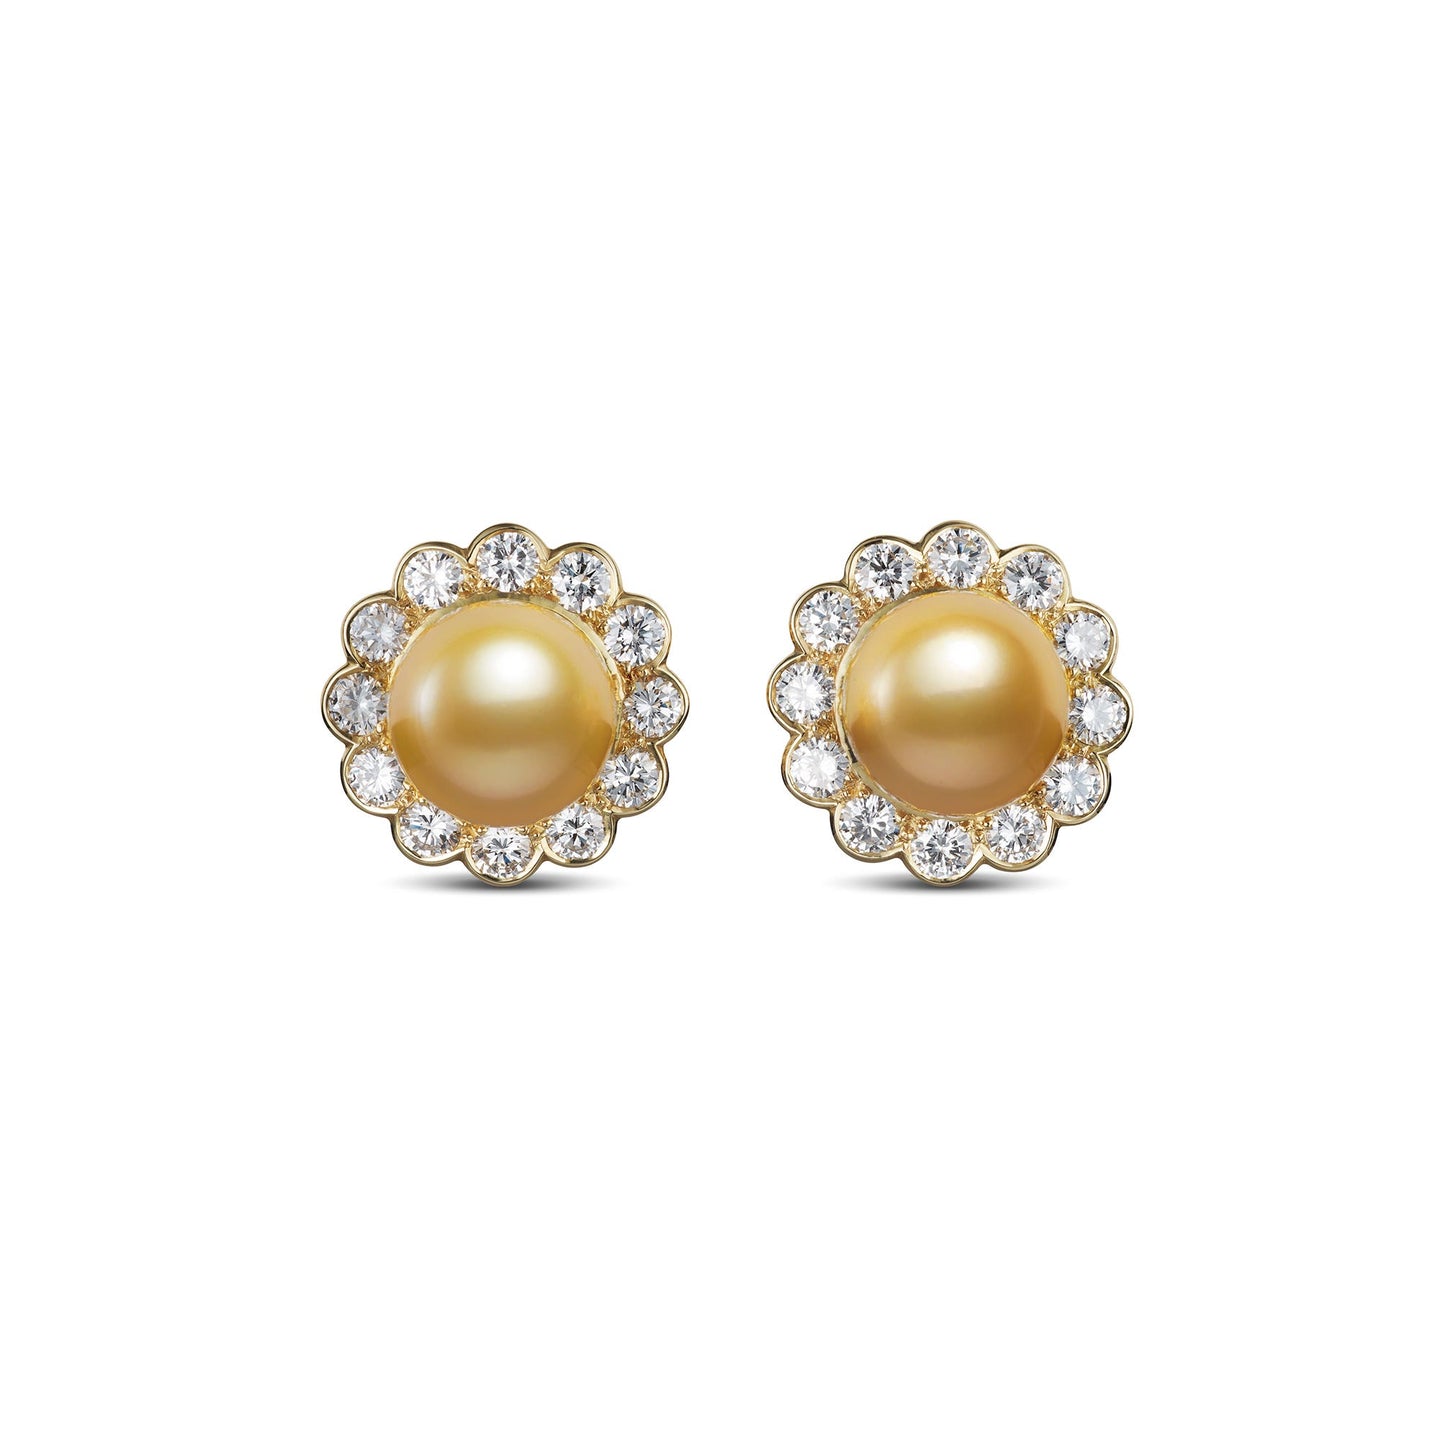 Gold Pearl Earrings in 18ct Yellow Gold with Diamonds